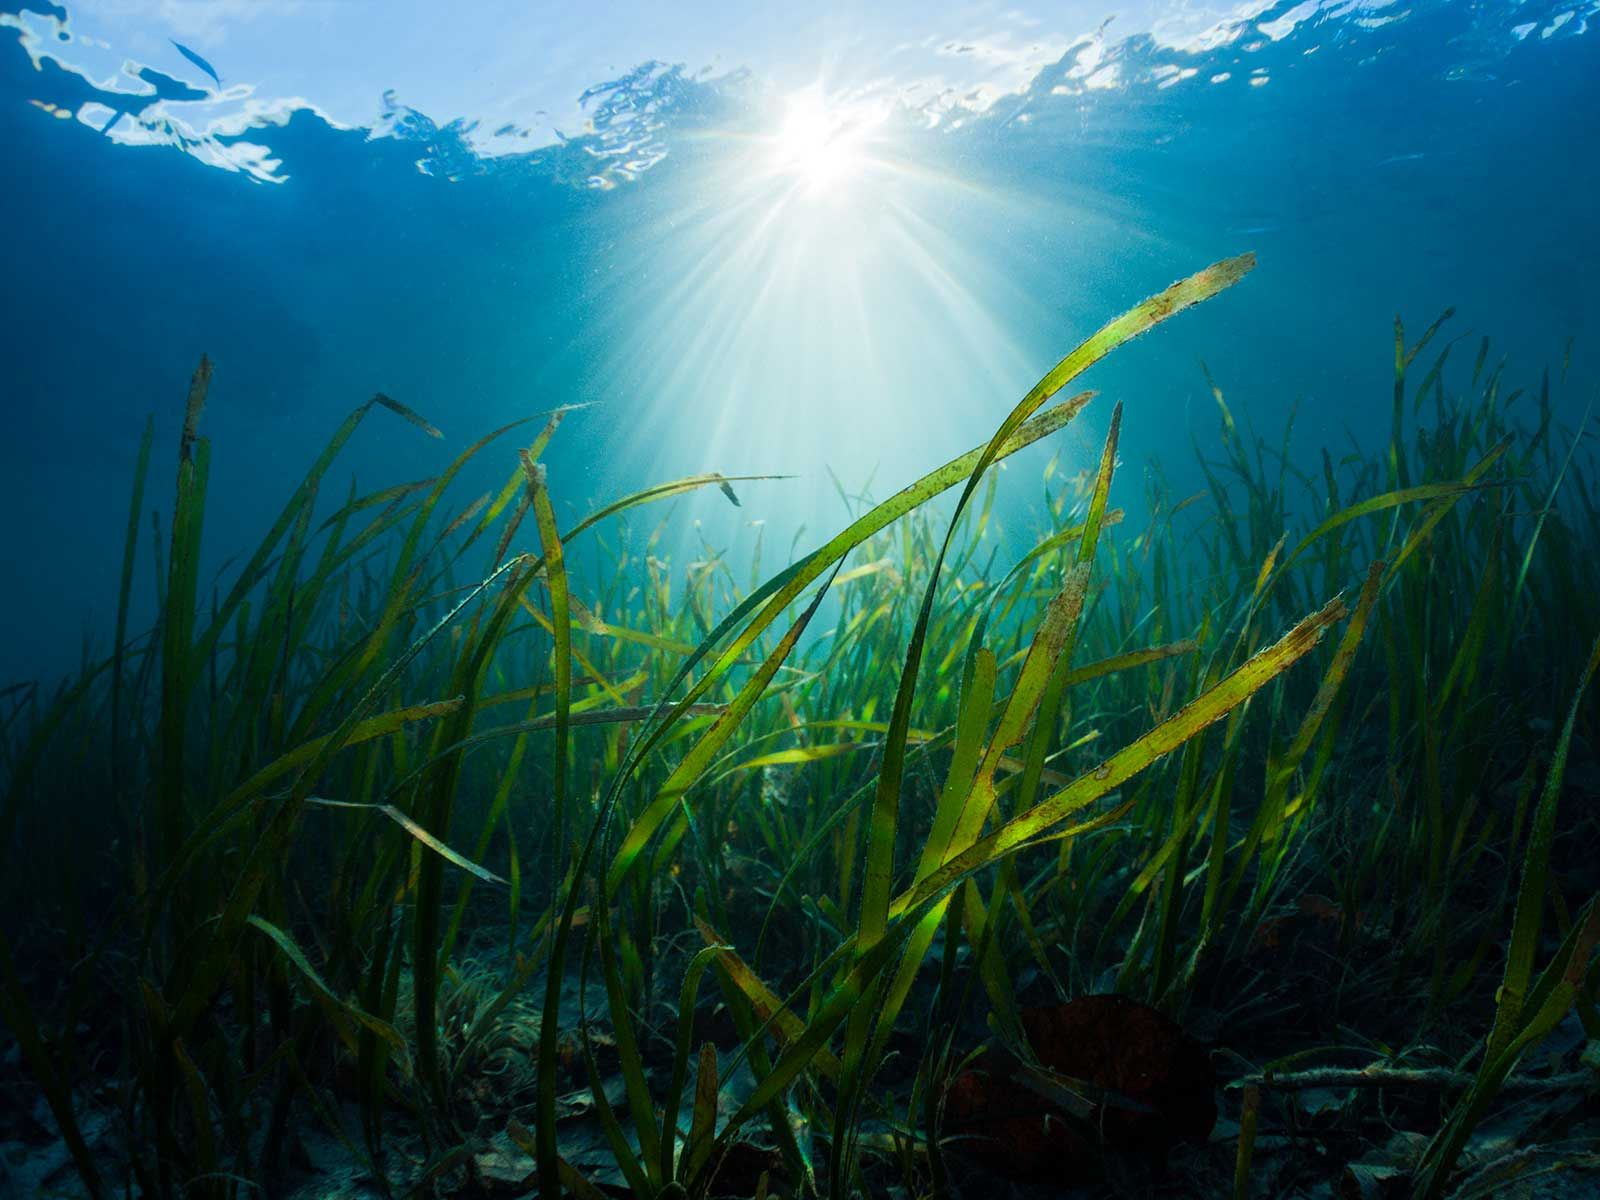 Seagrass Can Work as a Sanitation Service